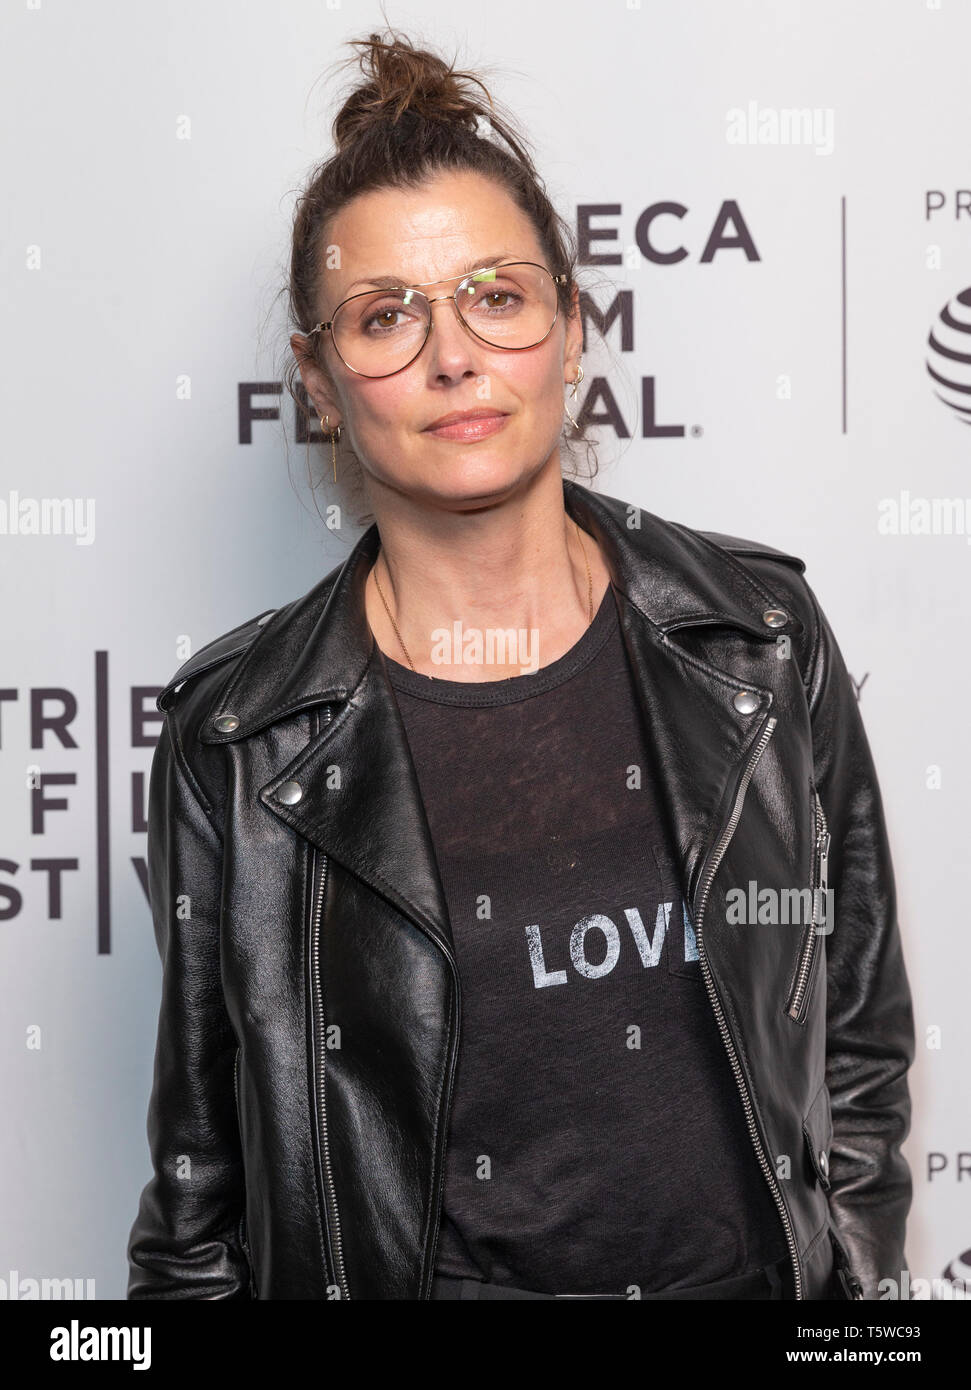 New York, NY - April 26, 2019: Bridget Moynahan attends world premiere of movie Crown Vic on Tribeca Film Festival at SVA Theatre Stock Photo